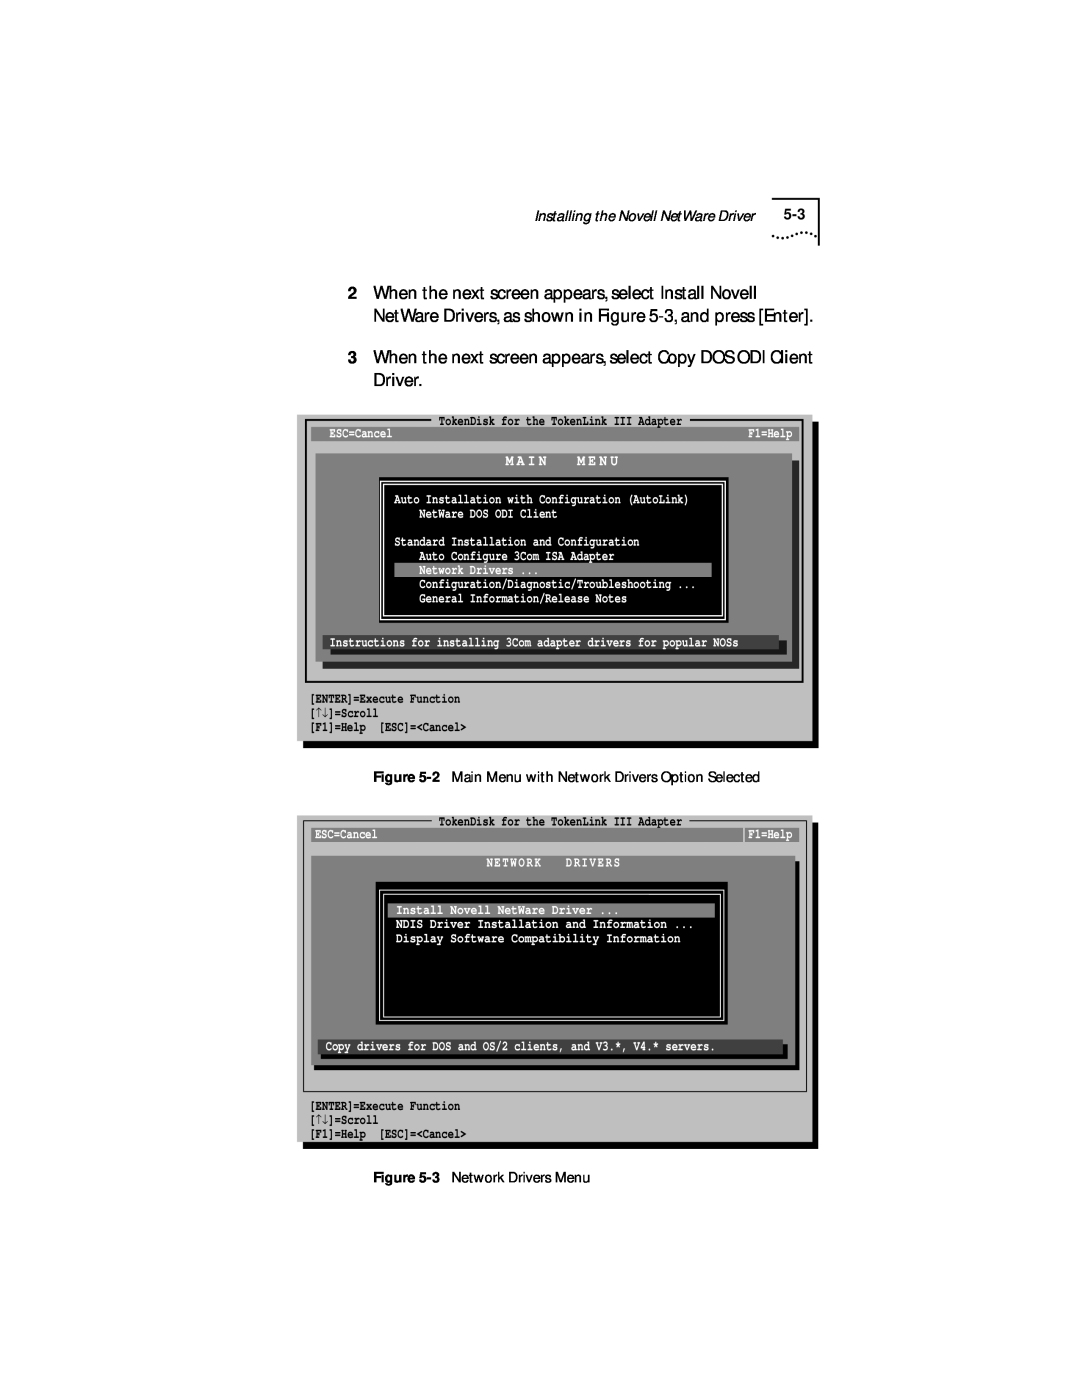 IBM 09-0572-000 manual M A I N, M E N U, Installing the Novell NetWare Driver, TokenDisk for the TokenLink III Adapter 